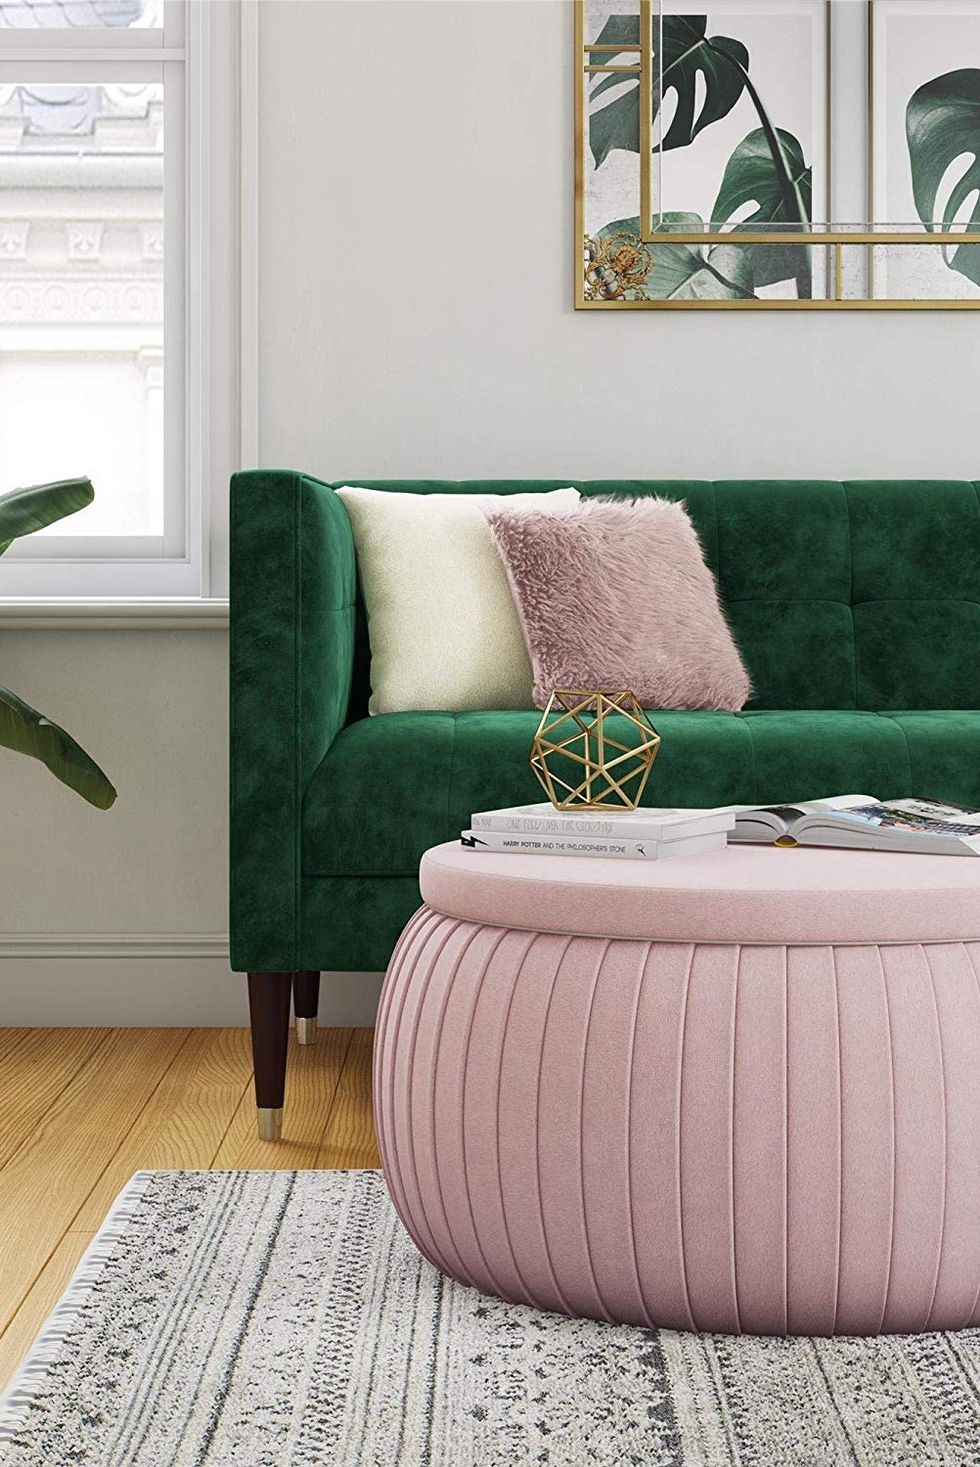 15 Gorgeous Furniture Pieces For Small Spaces — Apartment and Small Space  Furniture